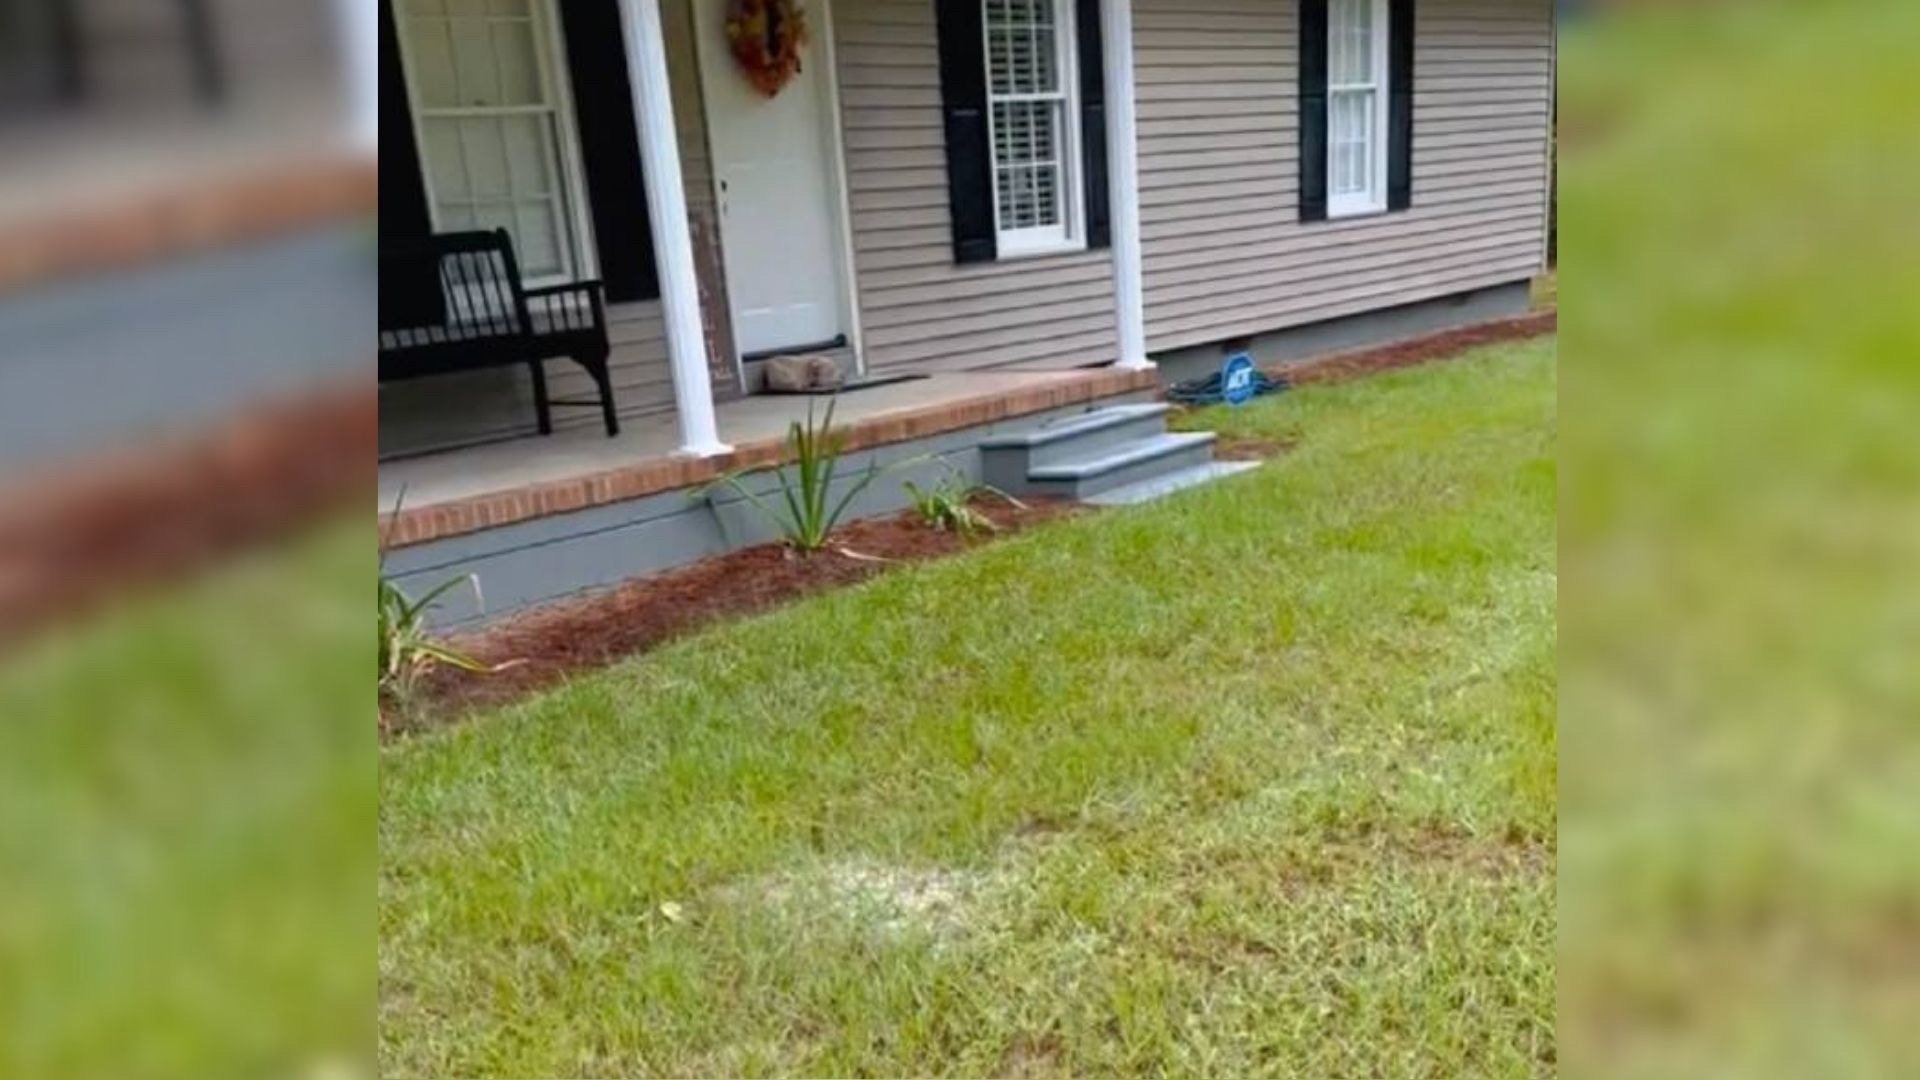 Woman Shocked To Find Someone Strange Resting On Her Doormat, Then Realizes Who It Was